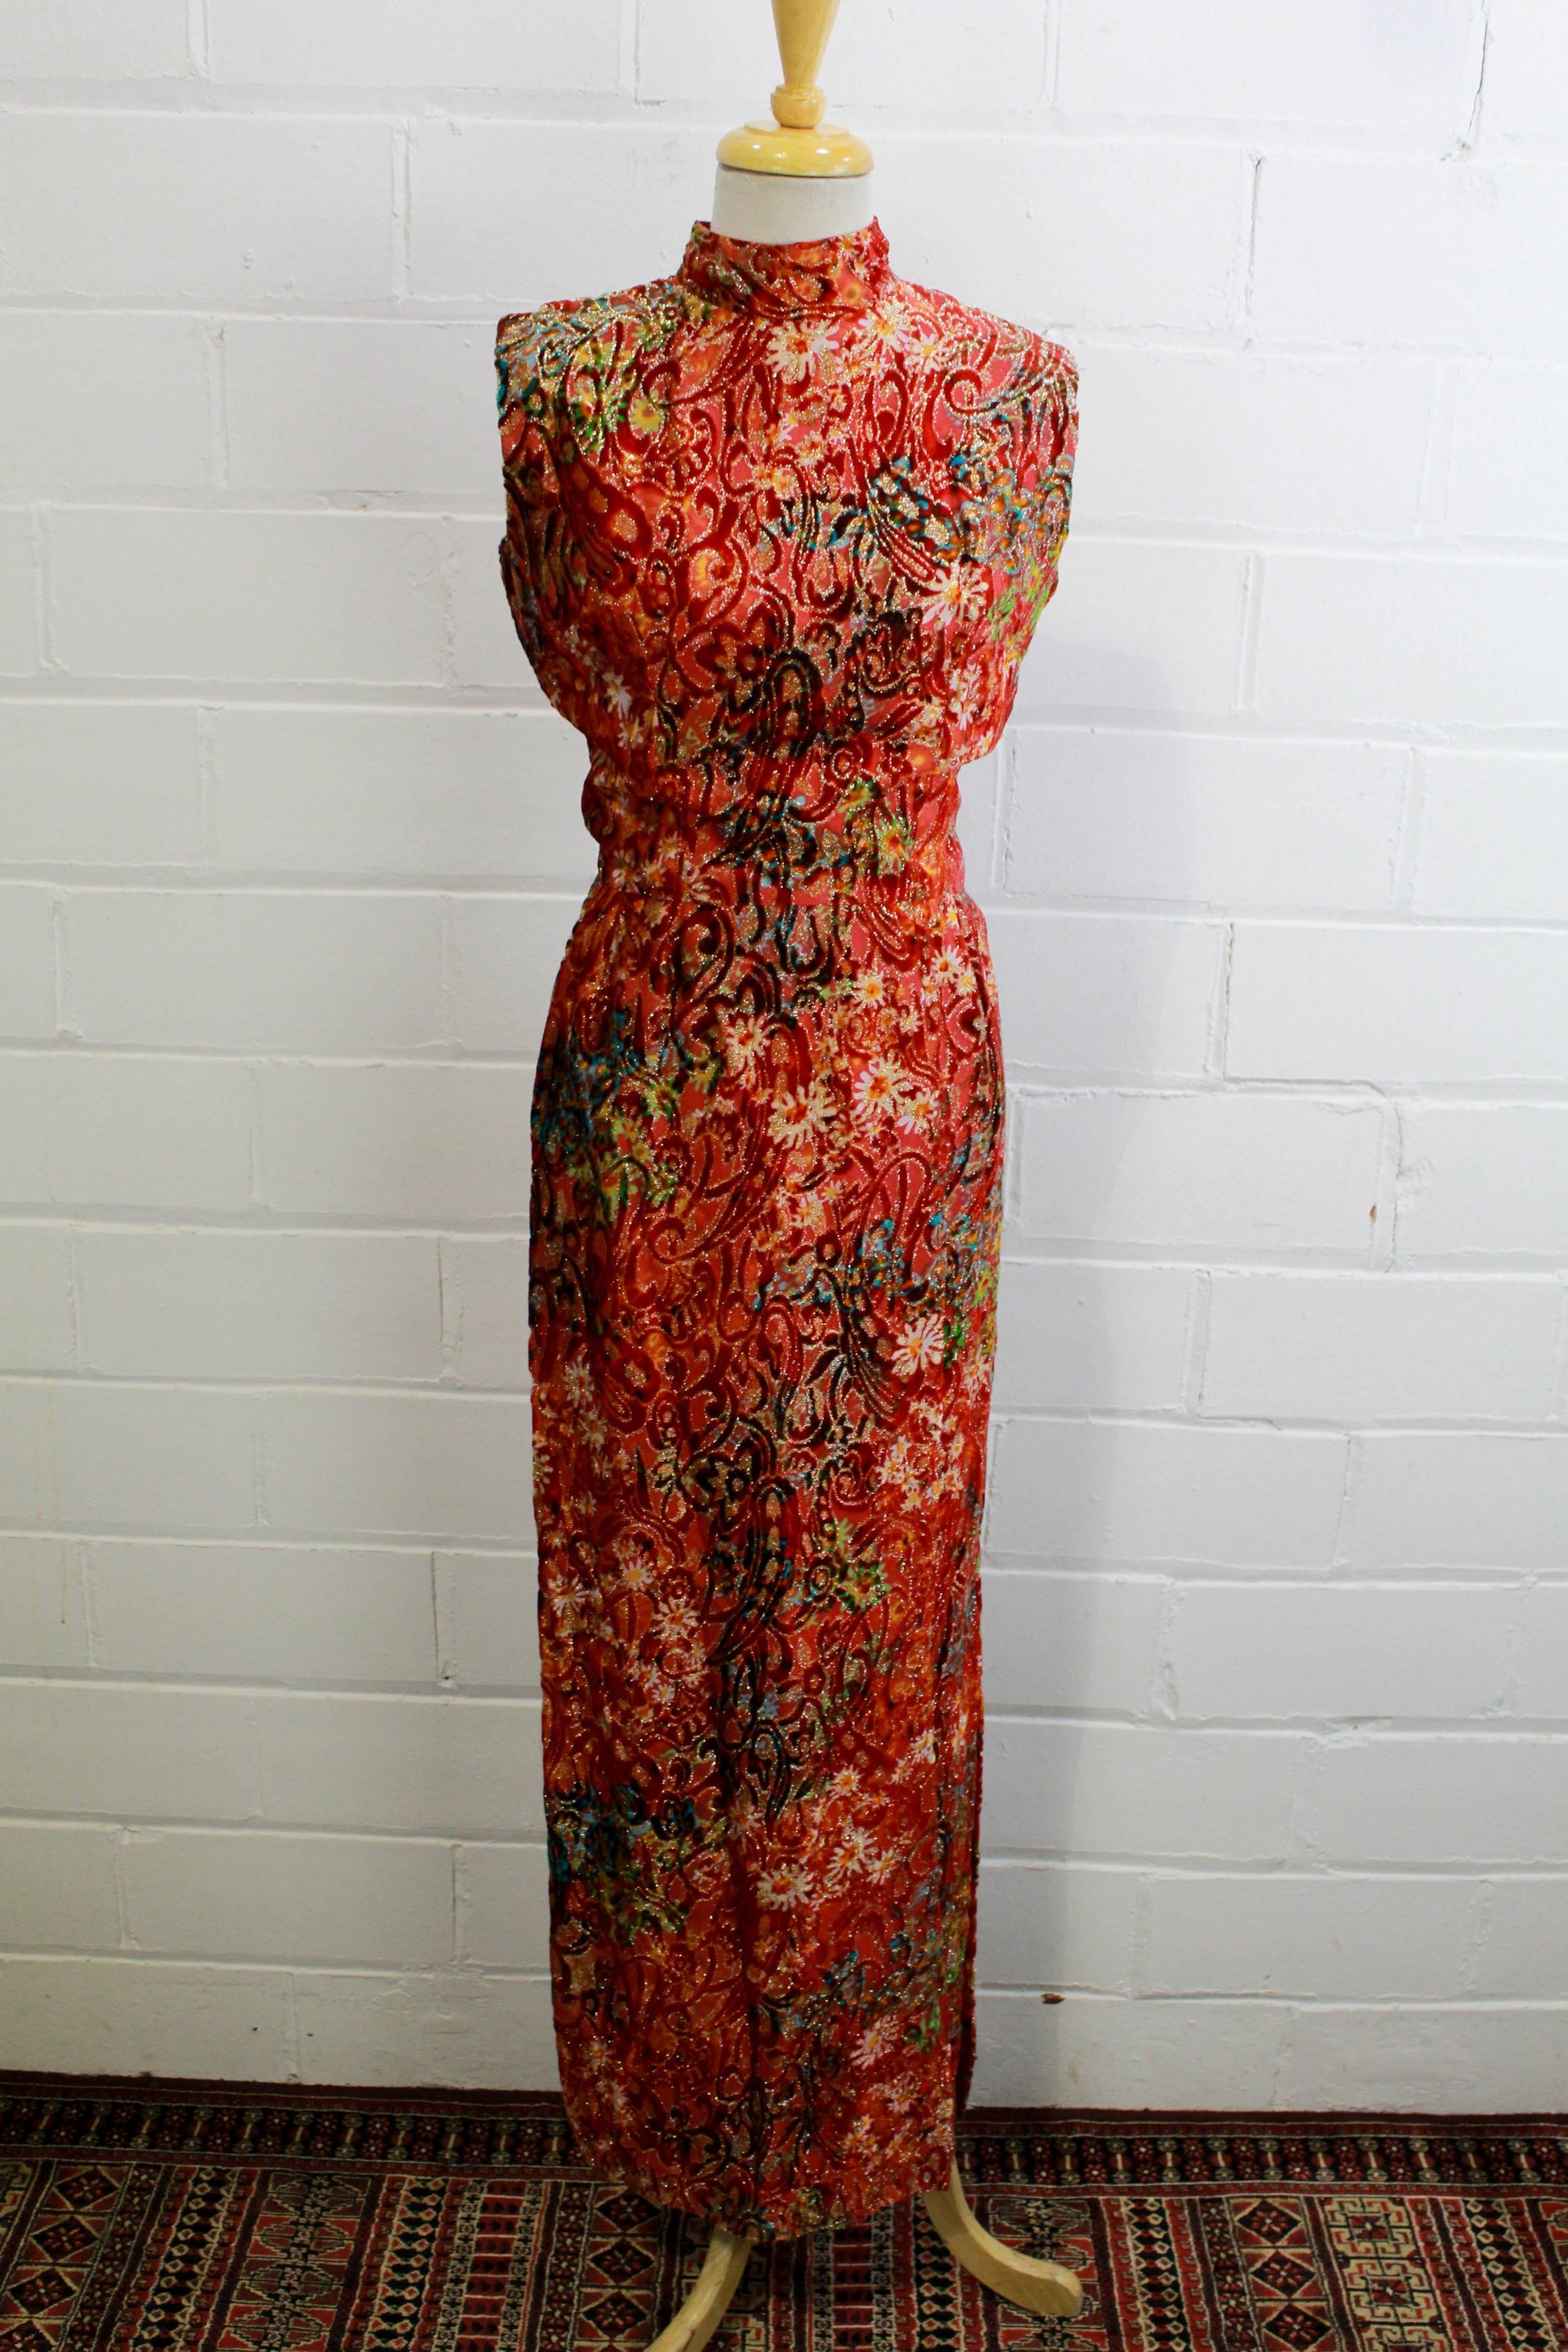 1970s maxi dress red and gold velvet metallic floral paisley print vintage holiday party dress